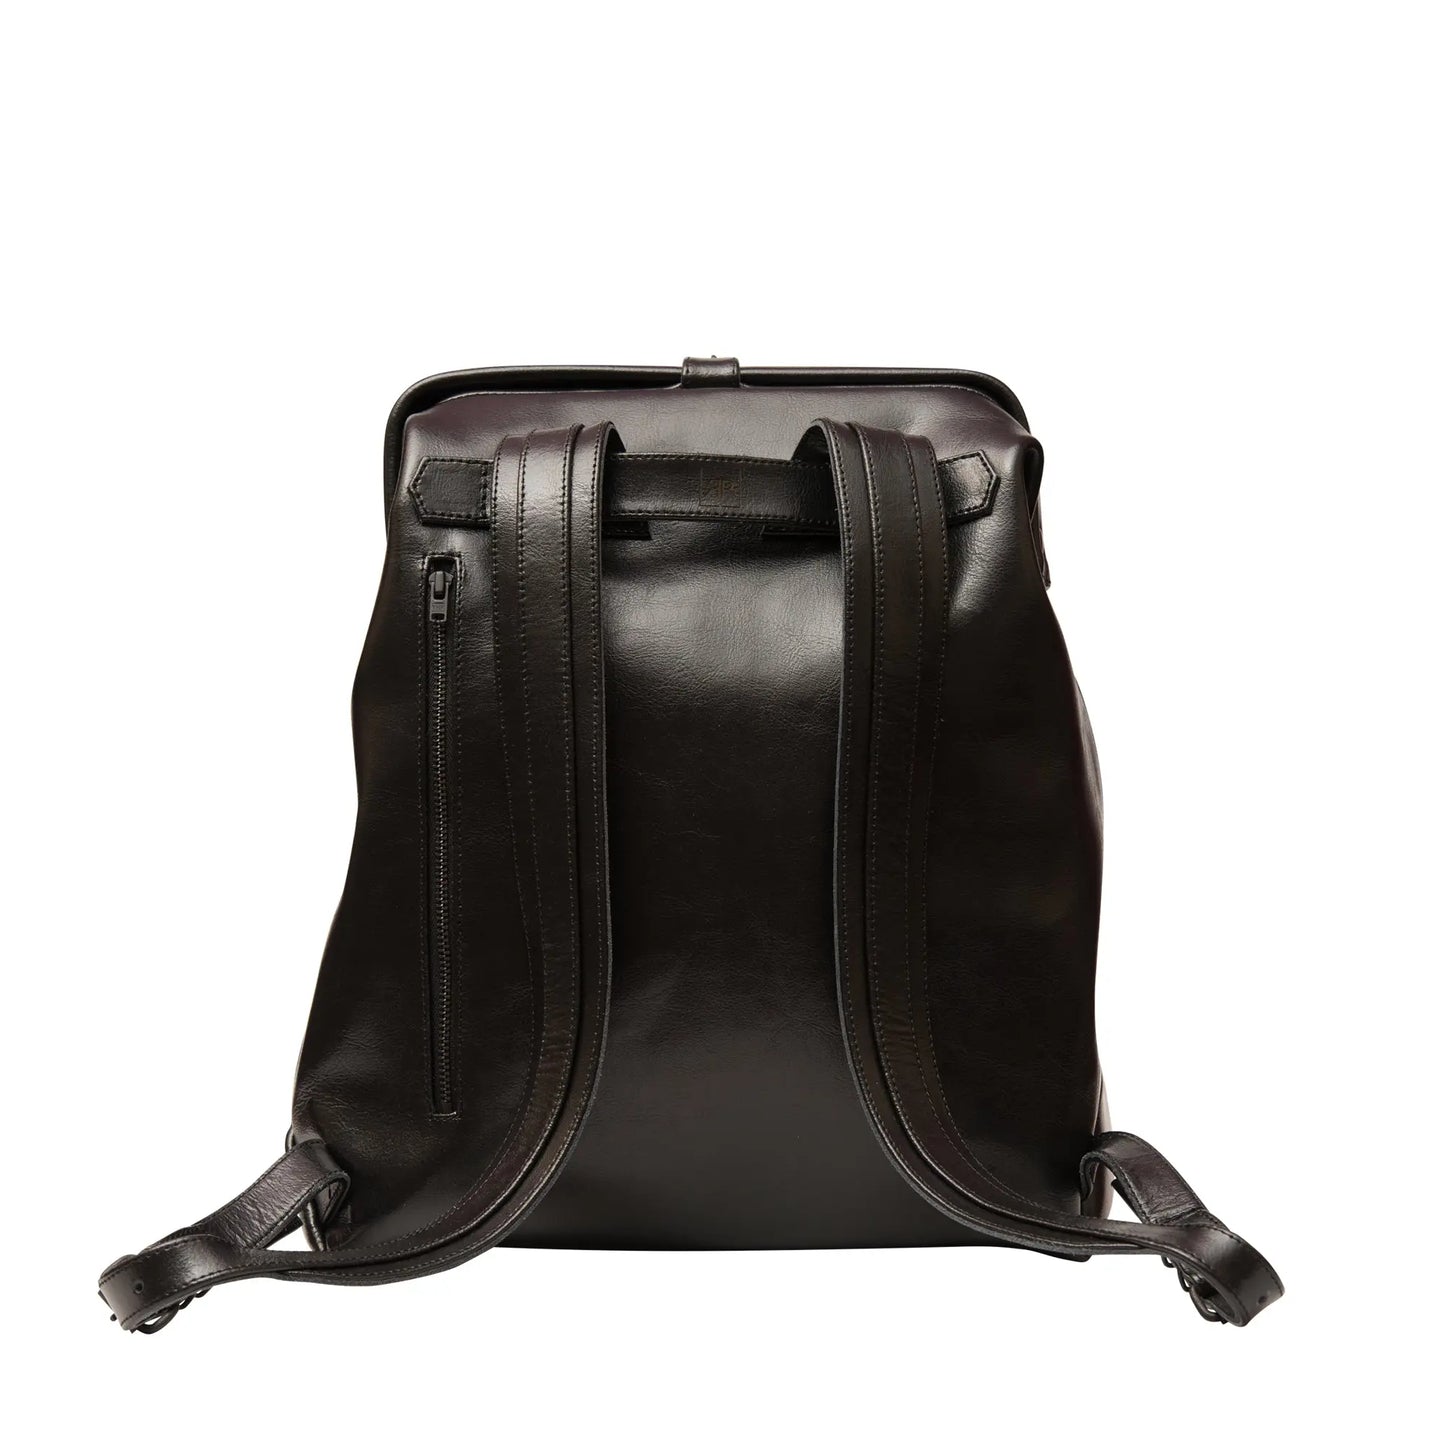 A black leather backpack with adjustable shoulder straps, grab handle, pin-buckle closure, and spacious interior. Available in medium and large sizes to fit laptops up to 17 inches.